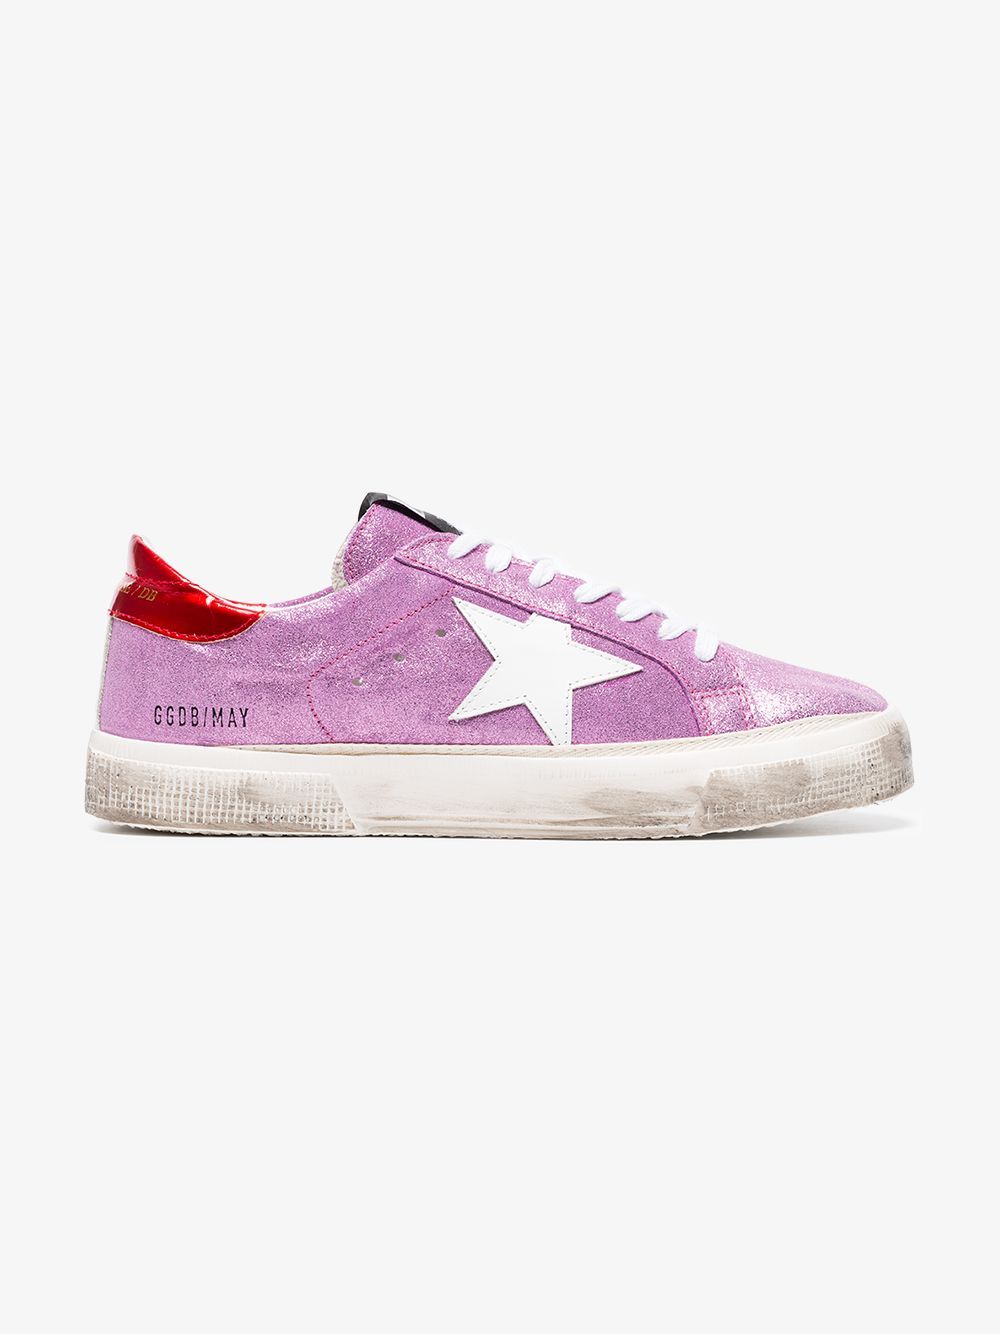 Golden Goose Deluxe Brand pink May glitter leather sneakers | Browns Fashion